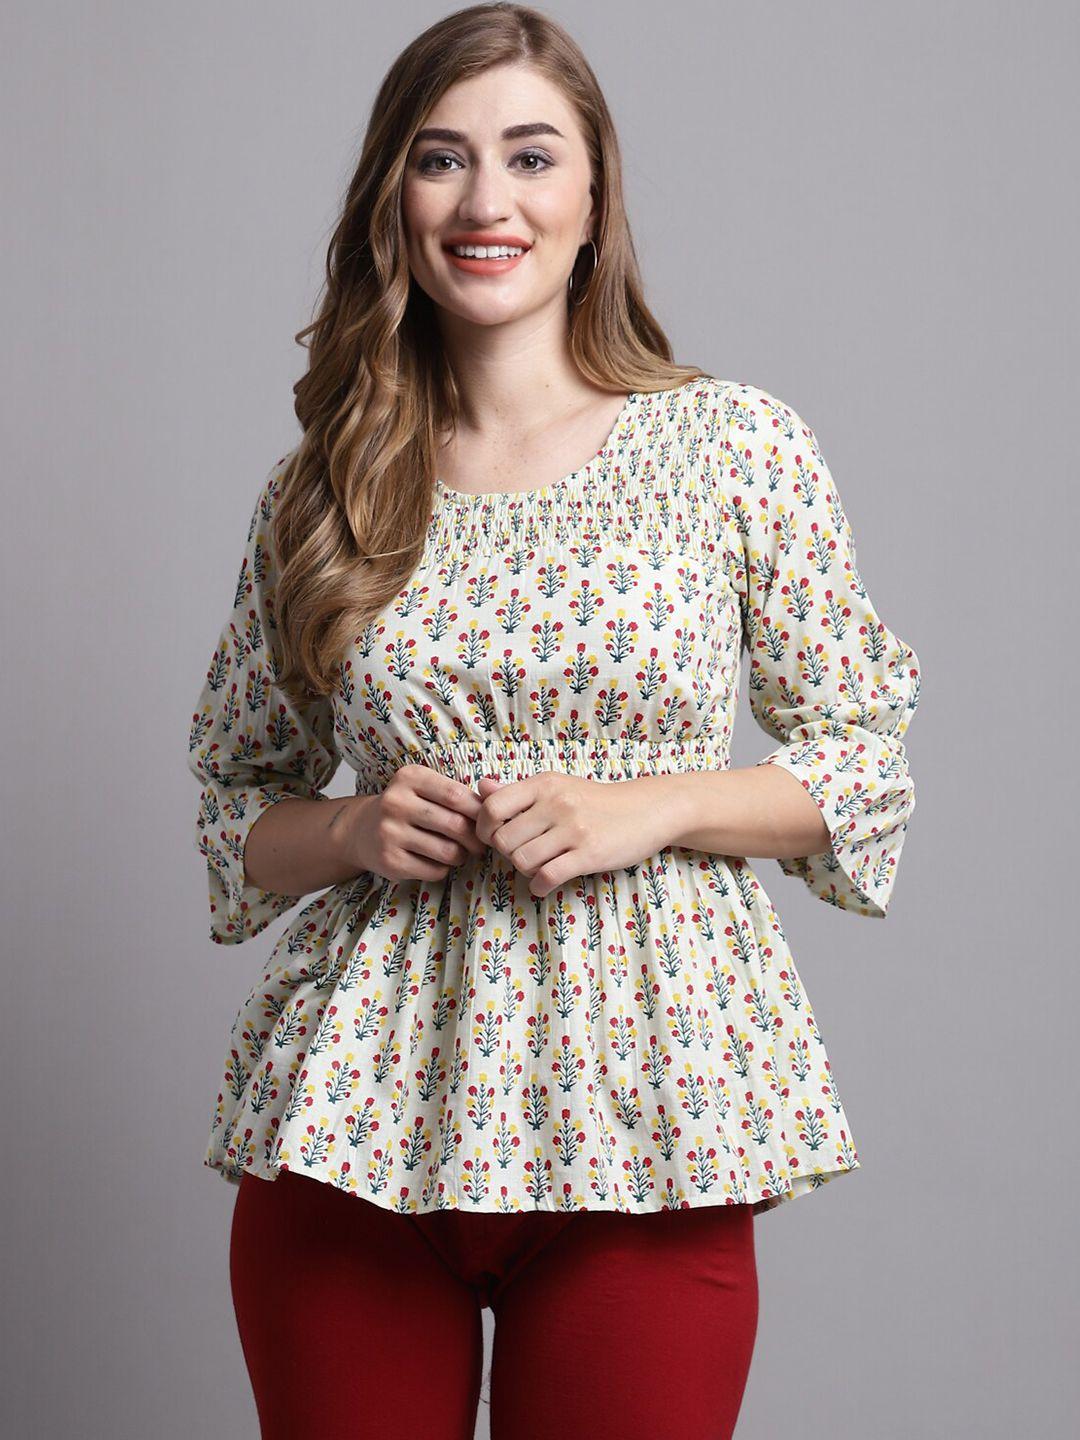 roly poly floral printed bell sleeve pure cotton peplum top